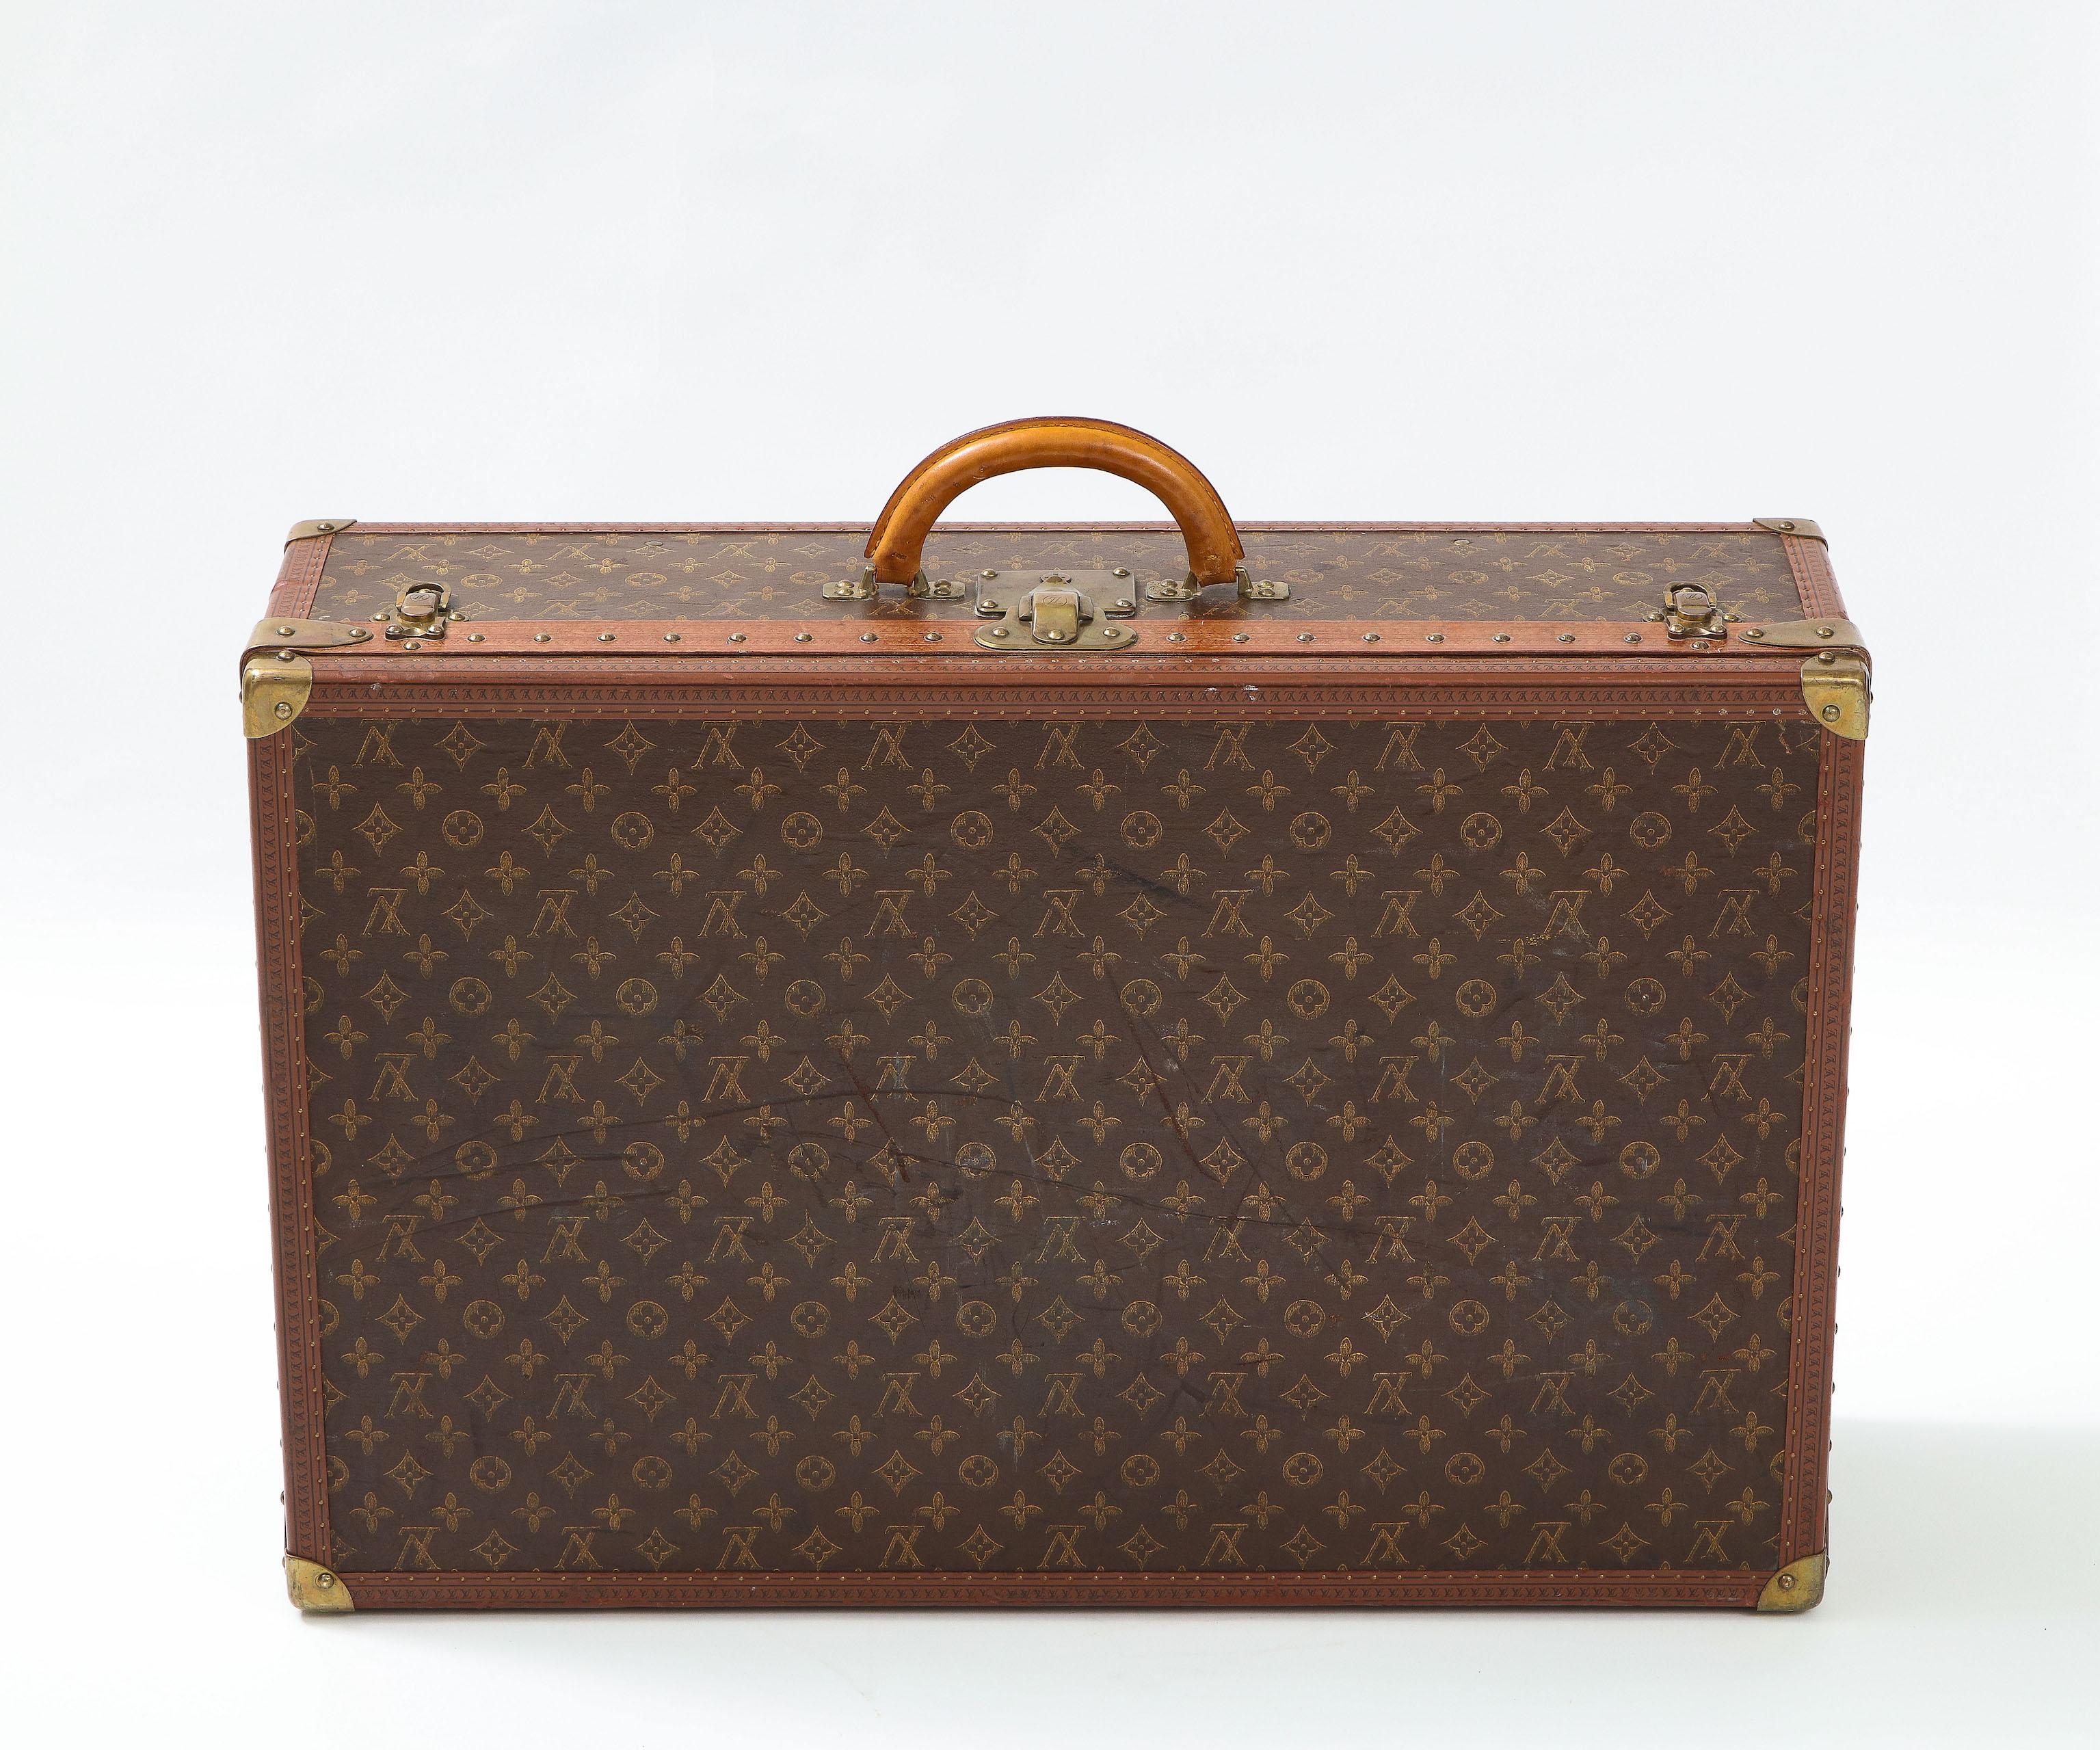 Rigid suitcase in monogram canvas, lozinated edges, corners and closure in brass. Bought from Saks Fifth Ave New-York.